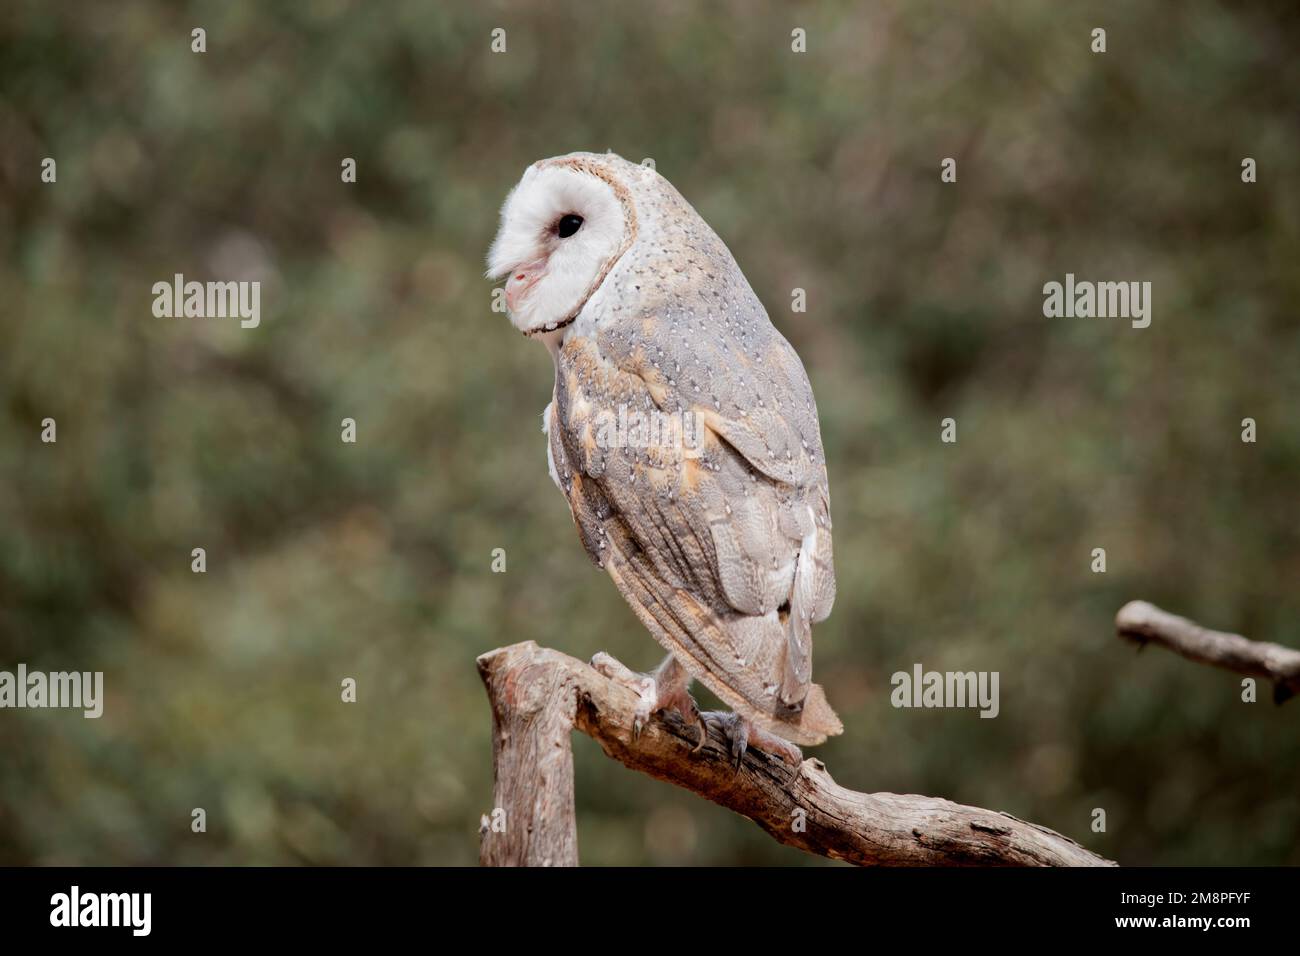 the barn owl is resting on a perch Stock Photo